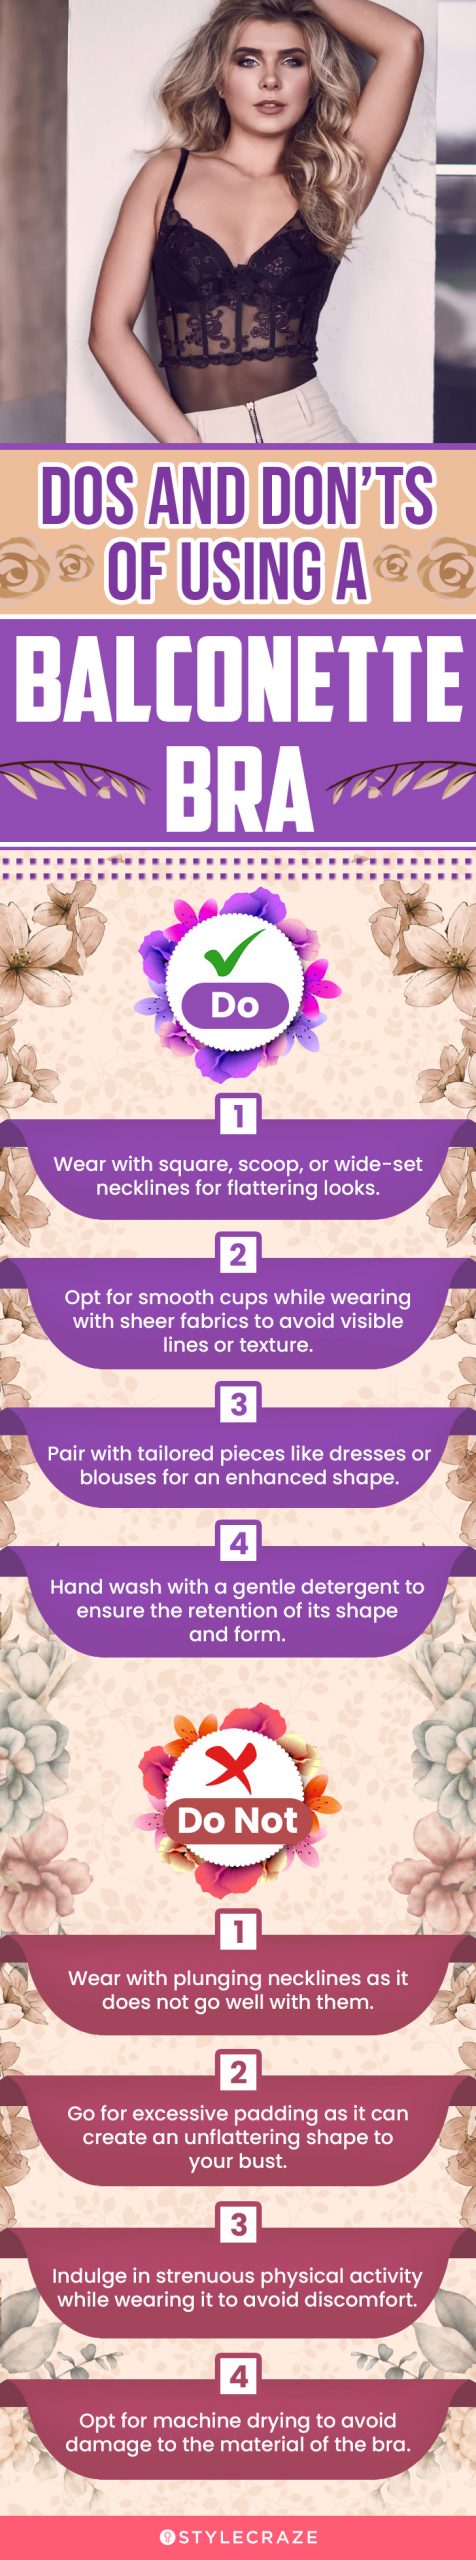 Dos And Don’ts Of Using A Balconette Bra (infographic)